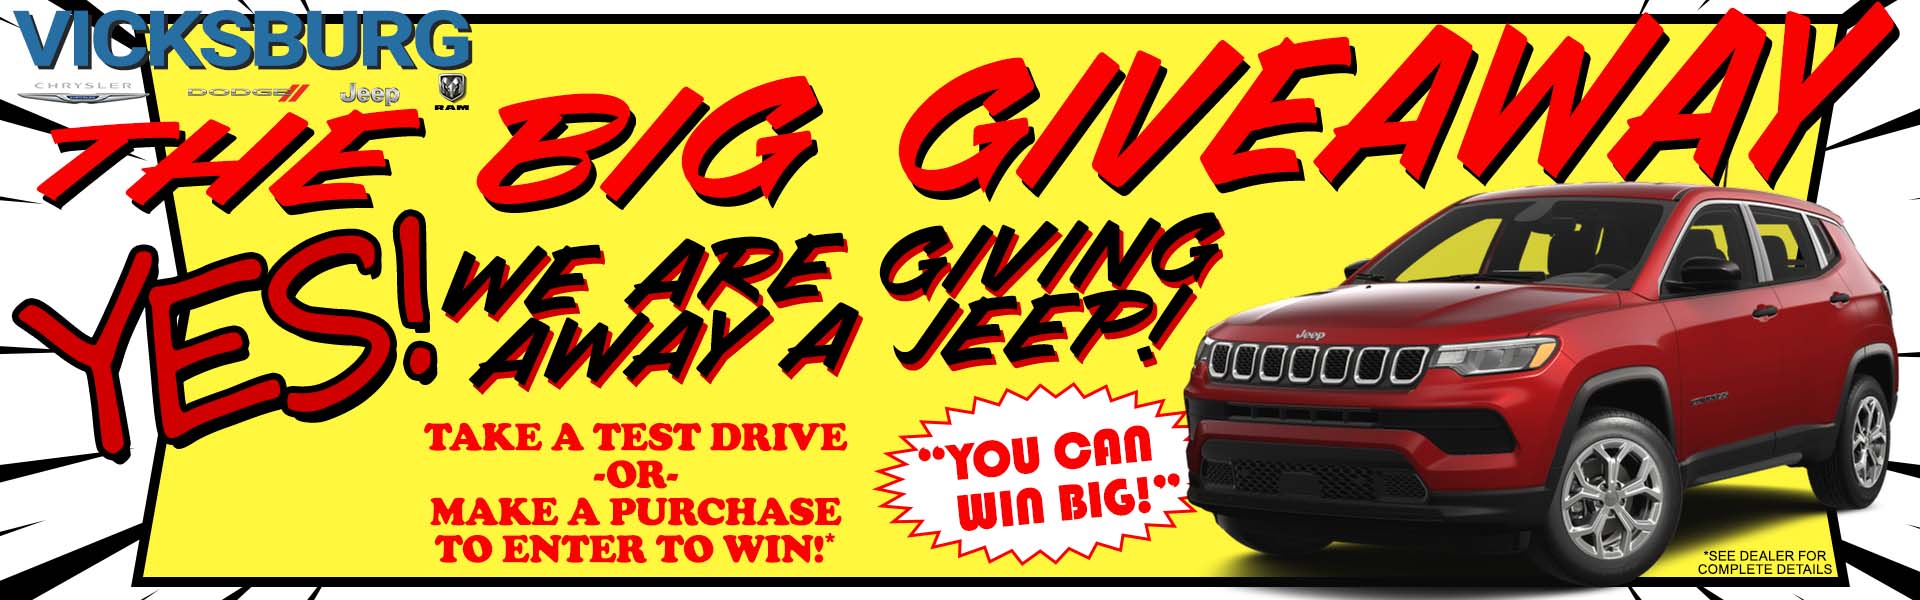 Vicksburg is giving away a Jeep! Visit us for details!